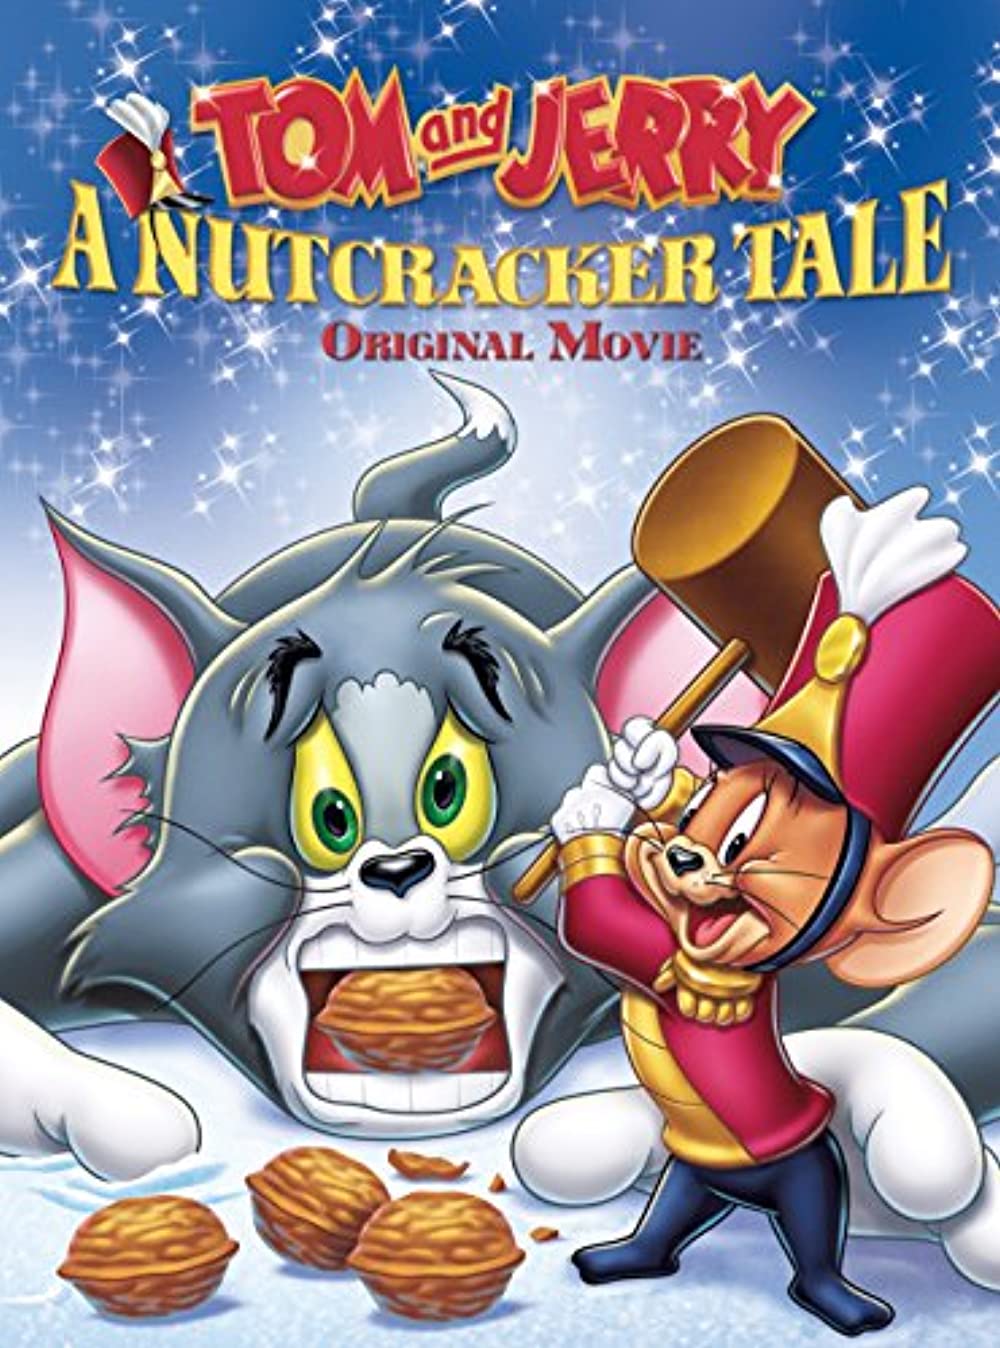 Download Tom and Jerry: A Nutcracker Tale Movie | Tom And Jerry: A Nutcracker Tale Online